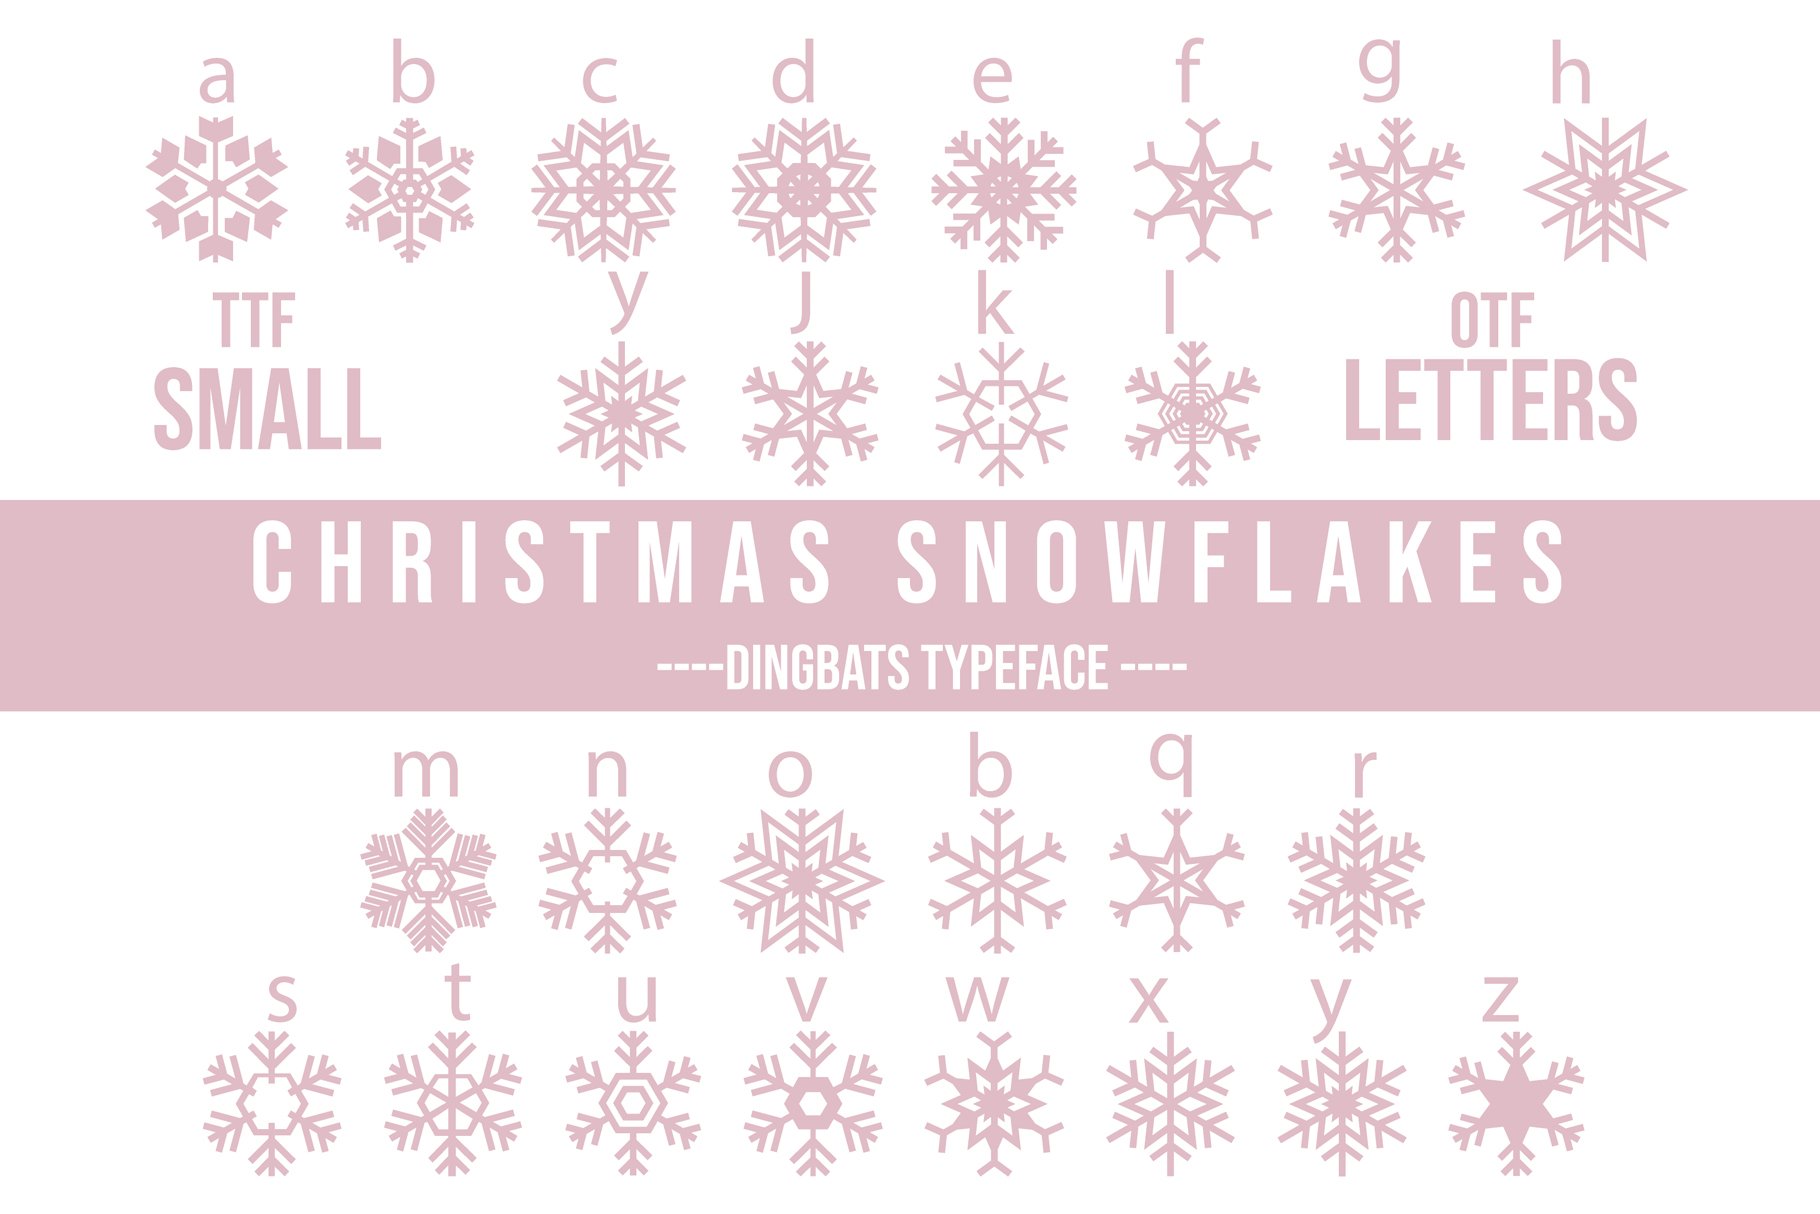 Christmas Snowflakes Dingbats Font cover image.